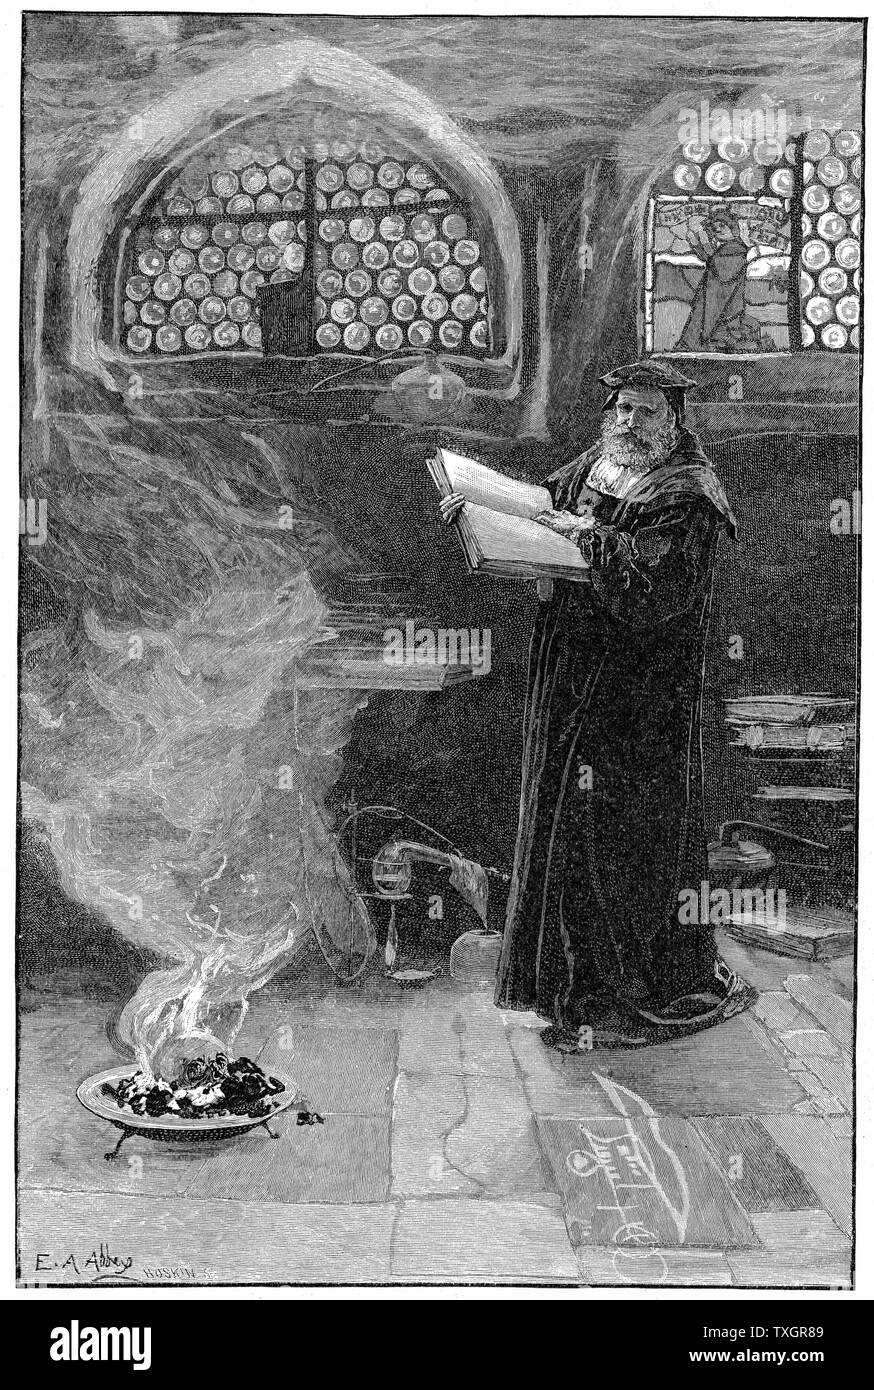 Dr Faustus conjuring up Mephistopheles. Faust formed subject of dramas by Christopher Marlowe and Goethe. Goethe version basis for Gounod's opera. Legend based on Johann Faust, German wandering conjuror and astrologer c.1488-1541. Stock Photo